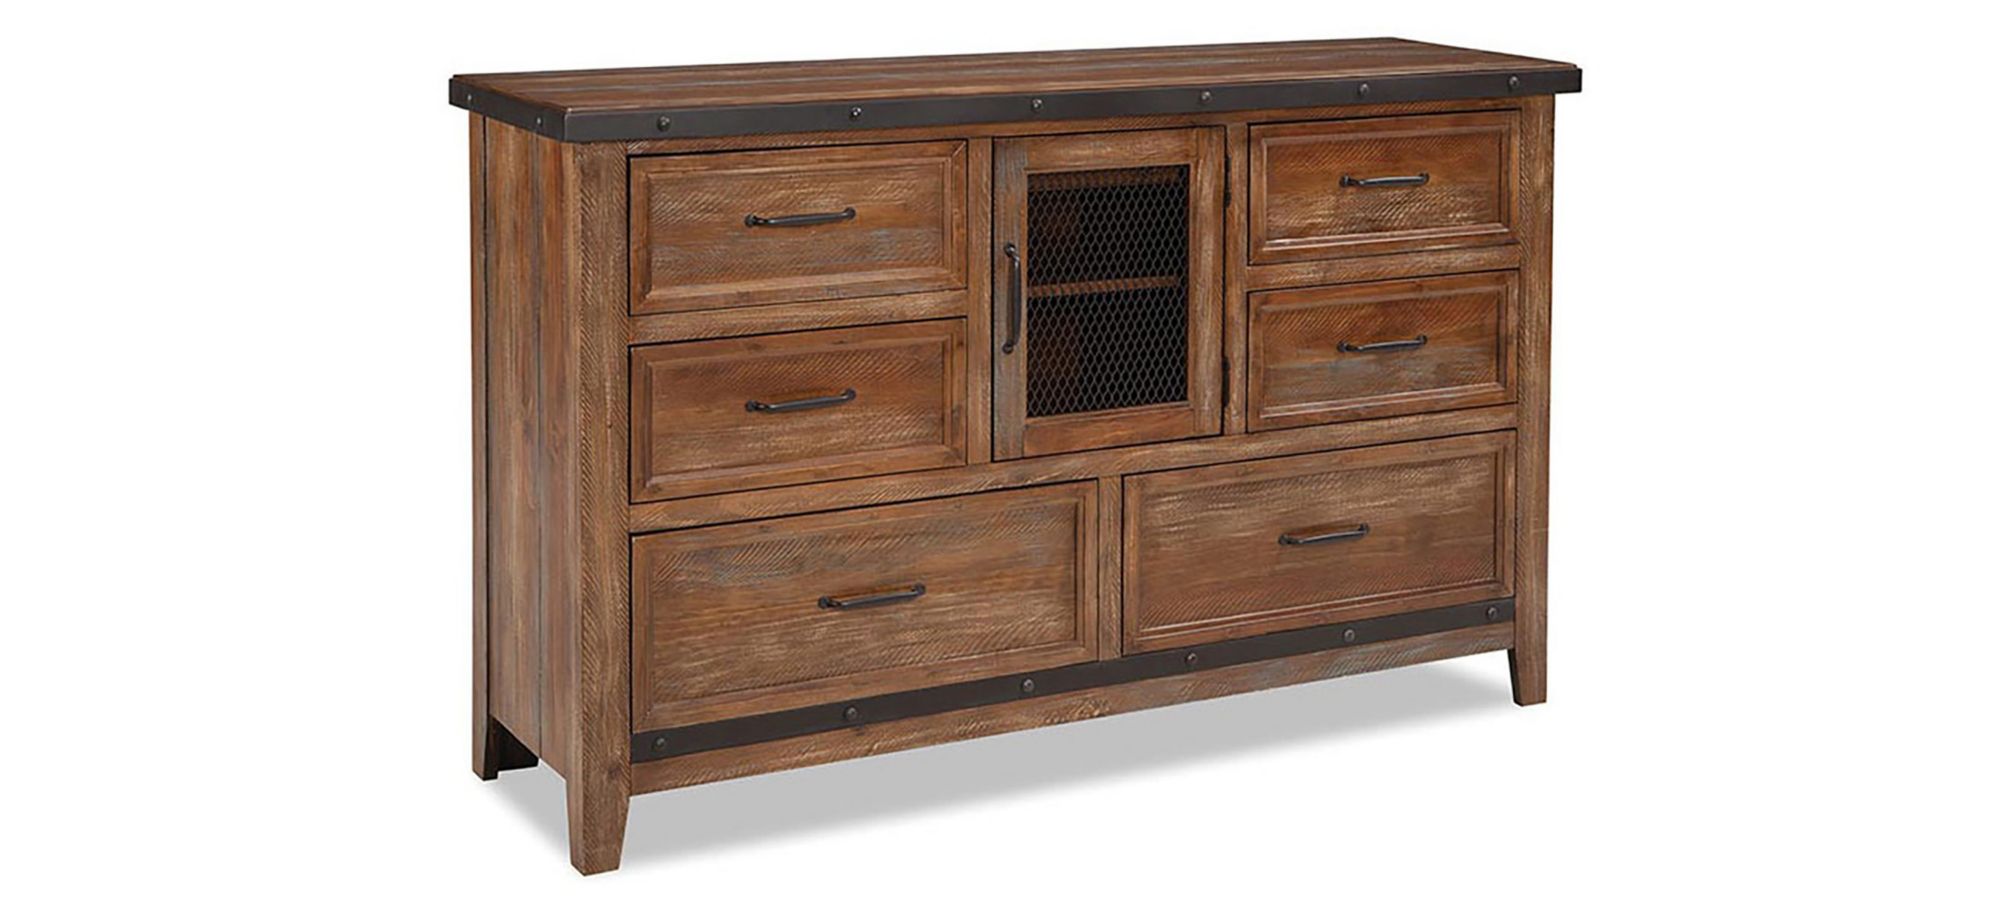 Taos Dresser in Canyon Brown by Intercon